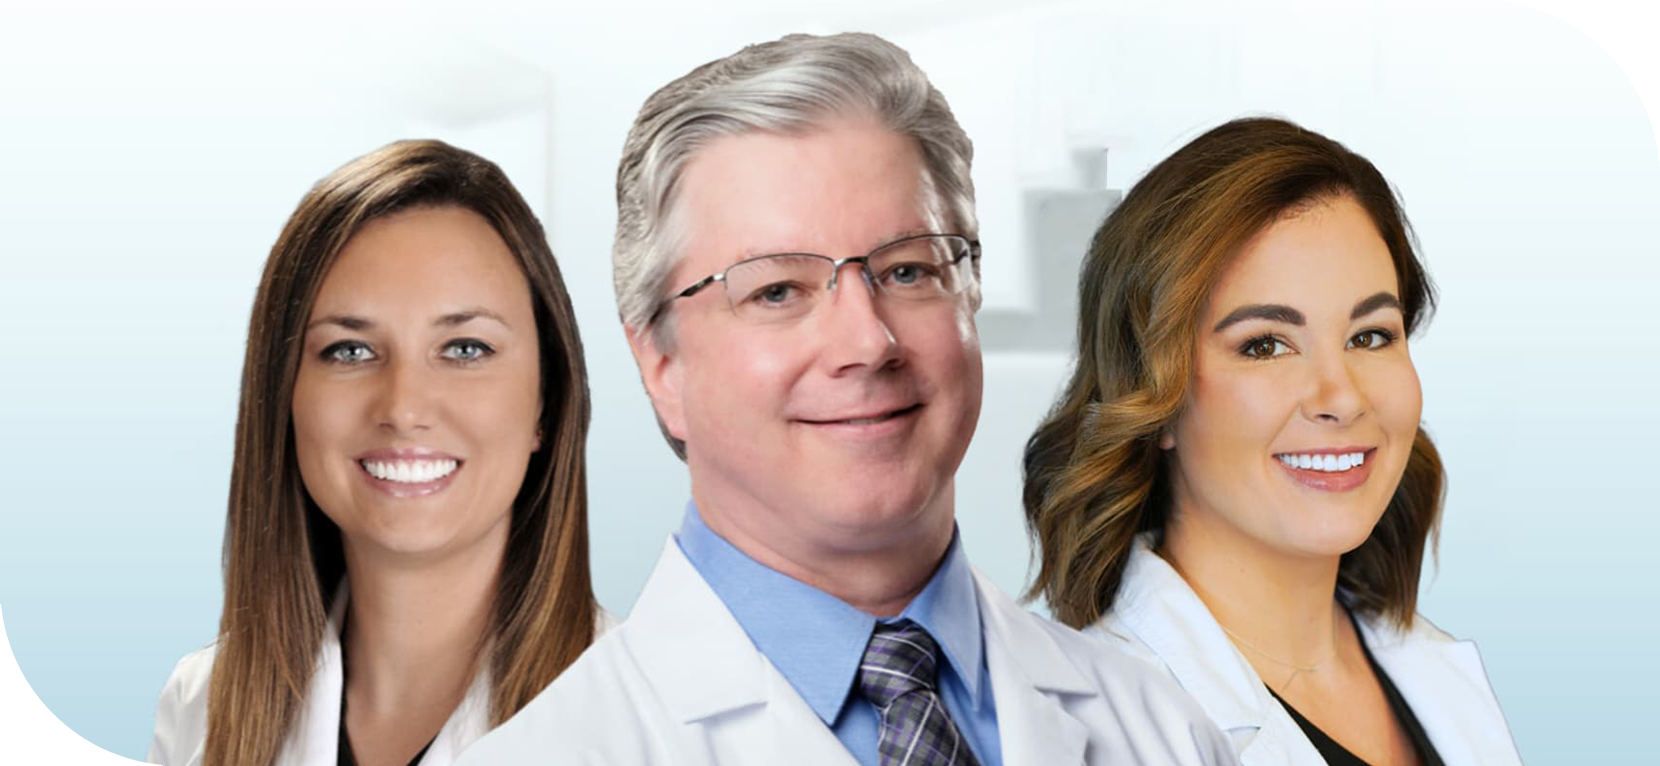 Injector Team: Alina Benitez, Dr. Edward Gross and Jessica White